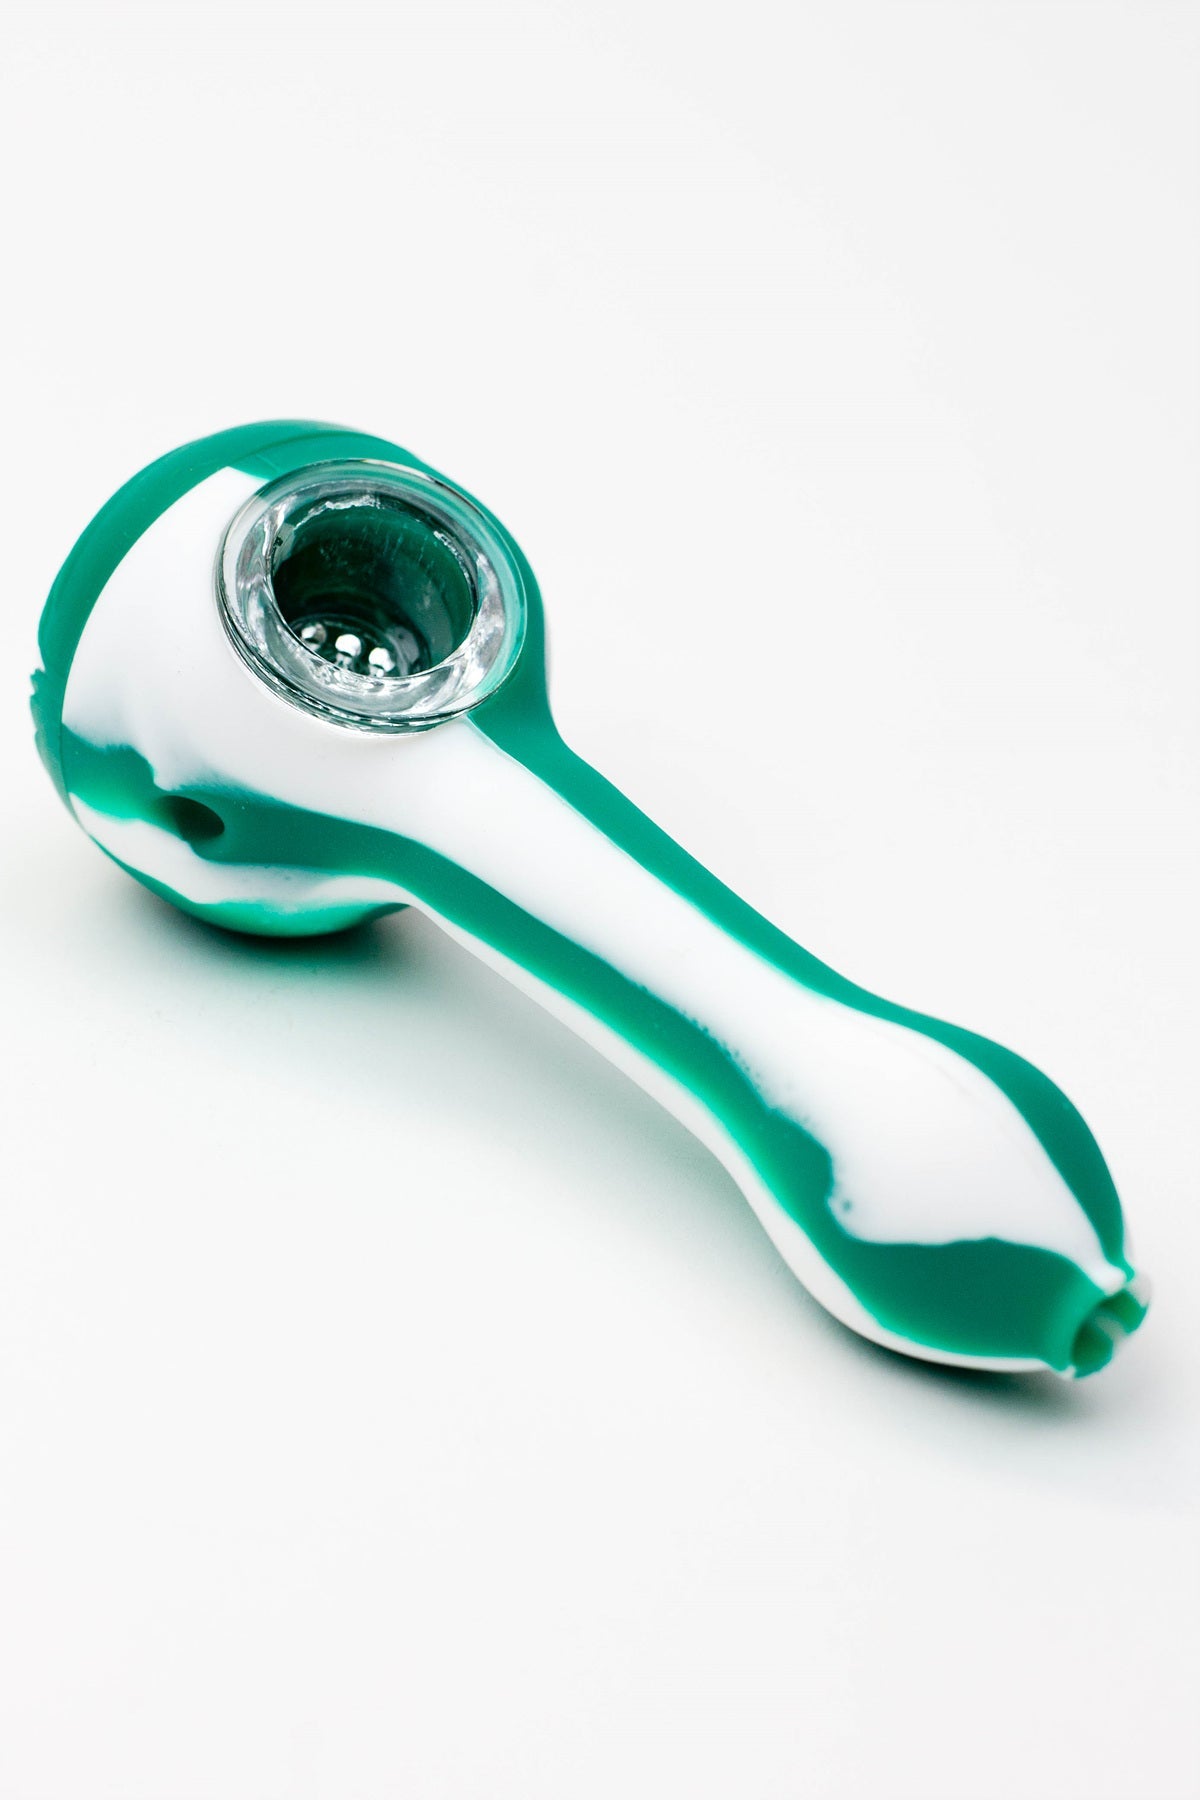 EYE Silicone Hand spoon Pipes smoking accessory with a glass bowl